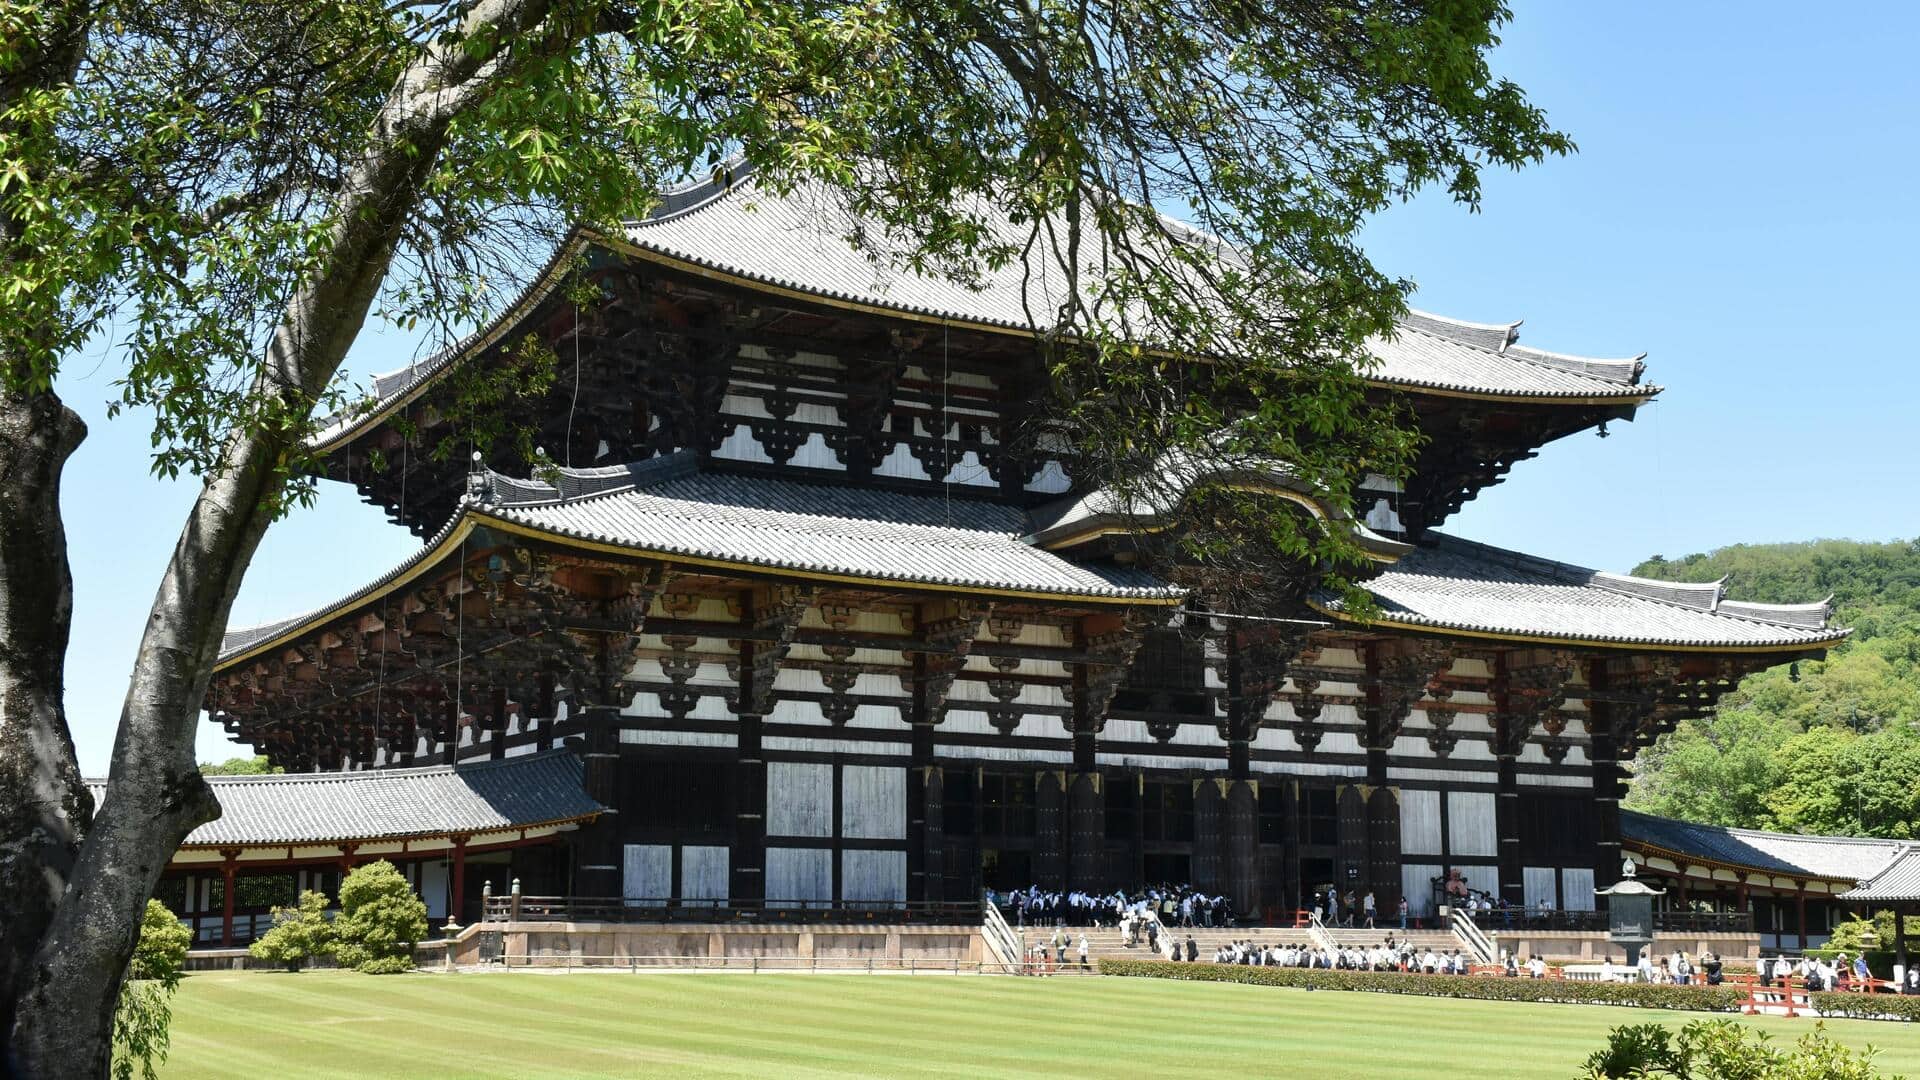 Experience serenity in Nara, Japan with this travel guide